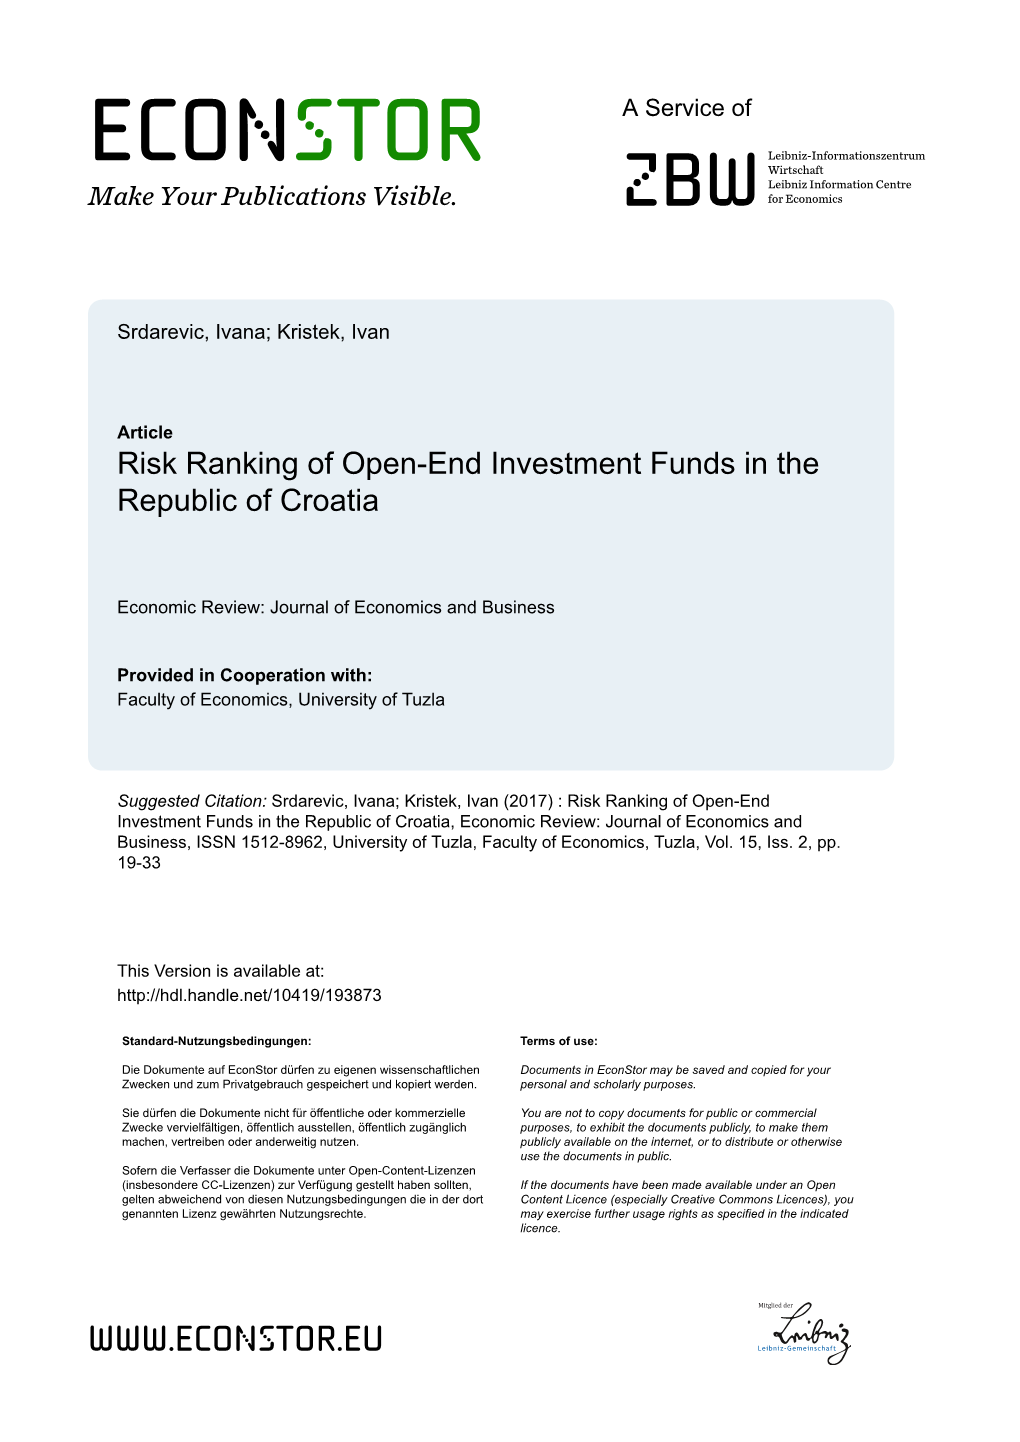 Risk Ranking of Open-End Investment Funds in the Republic of Croatia